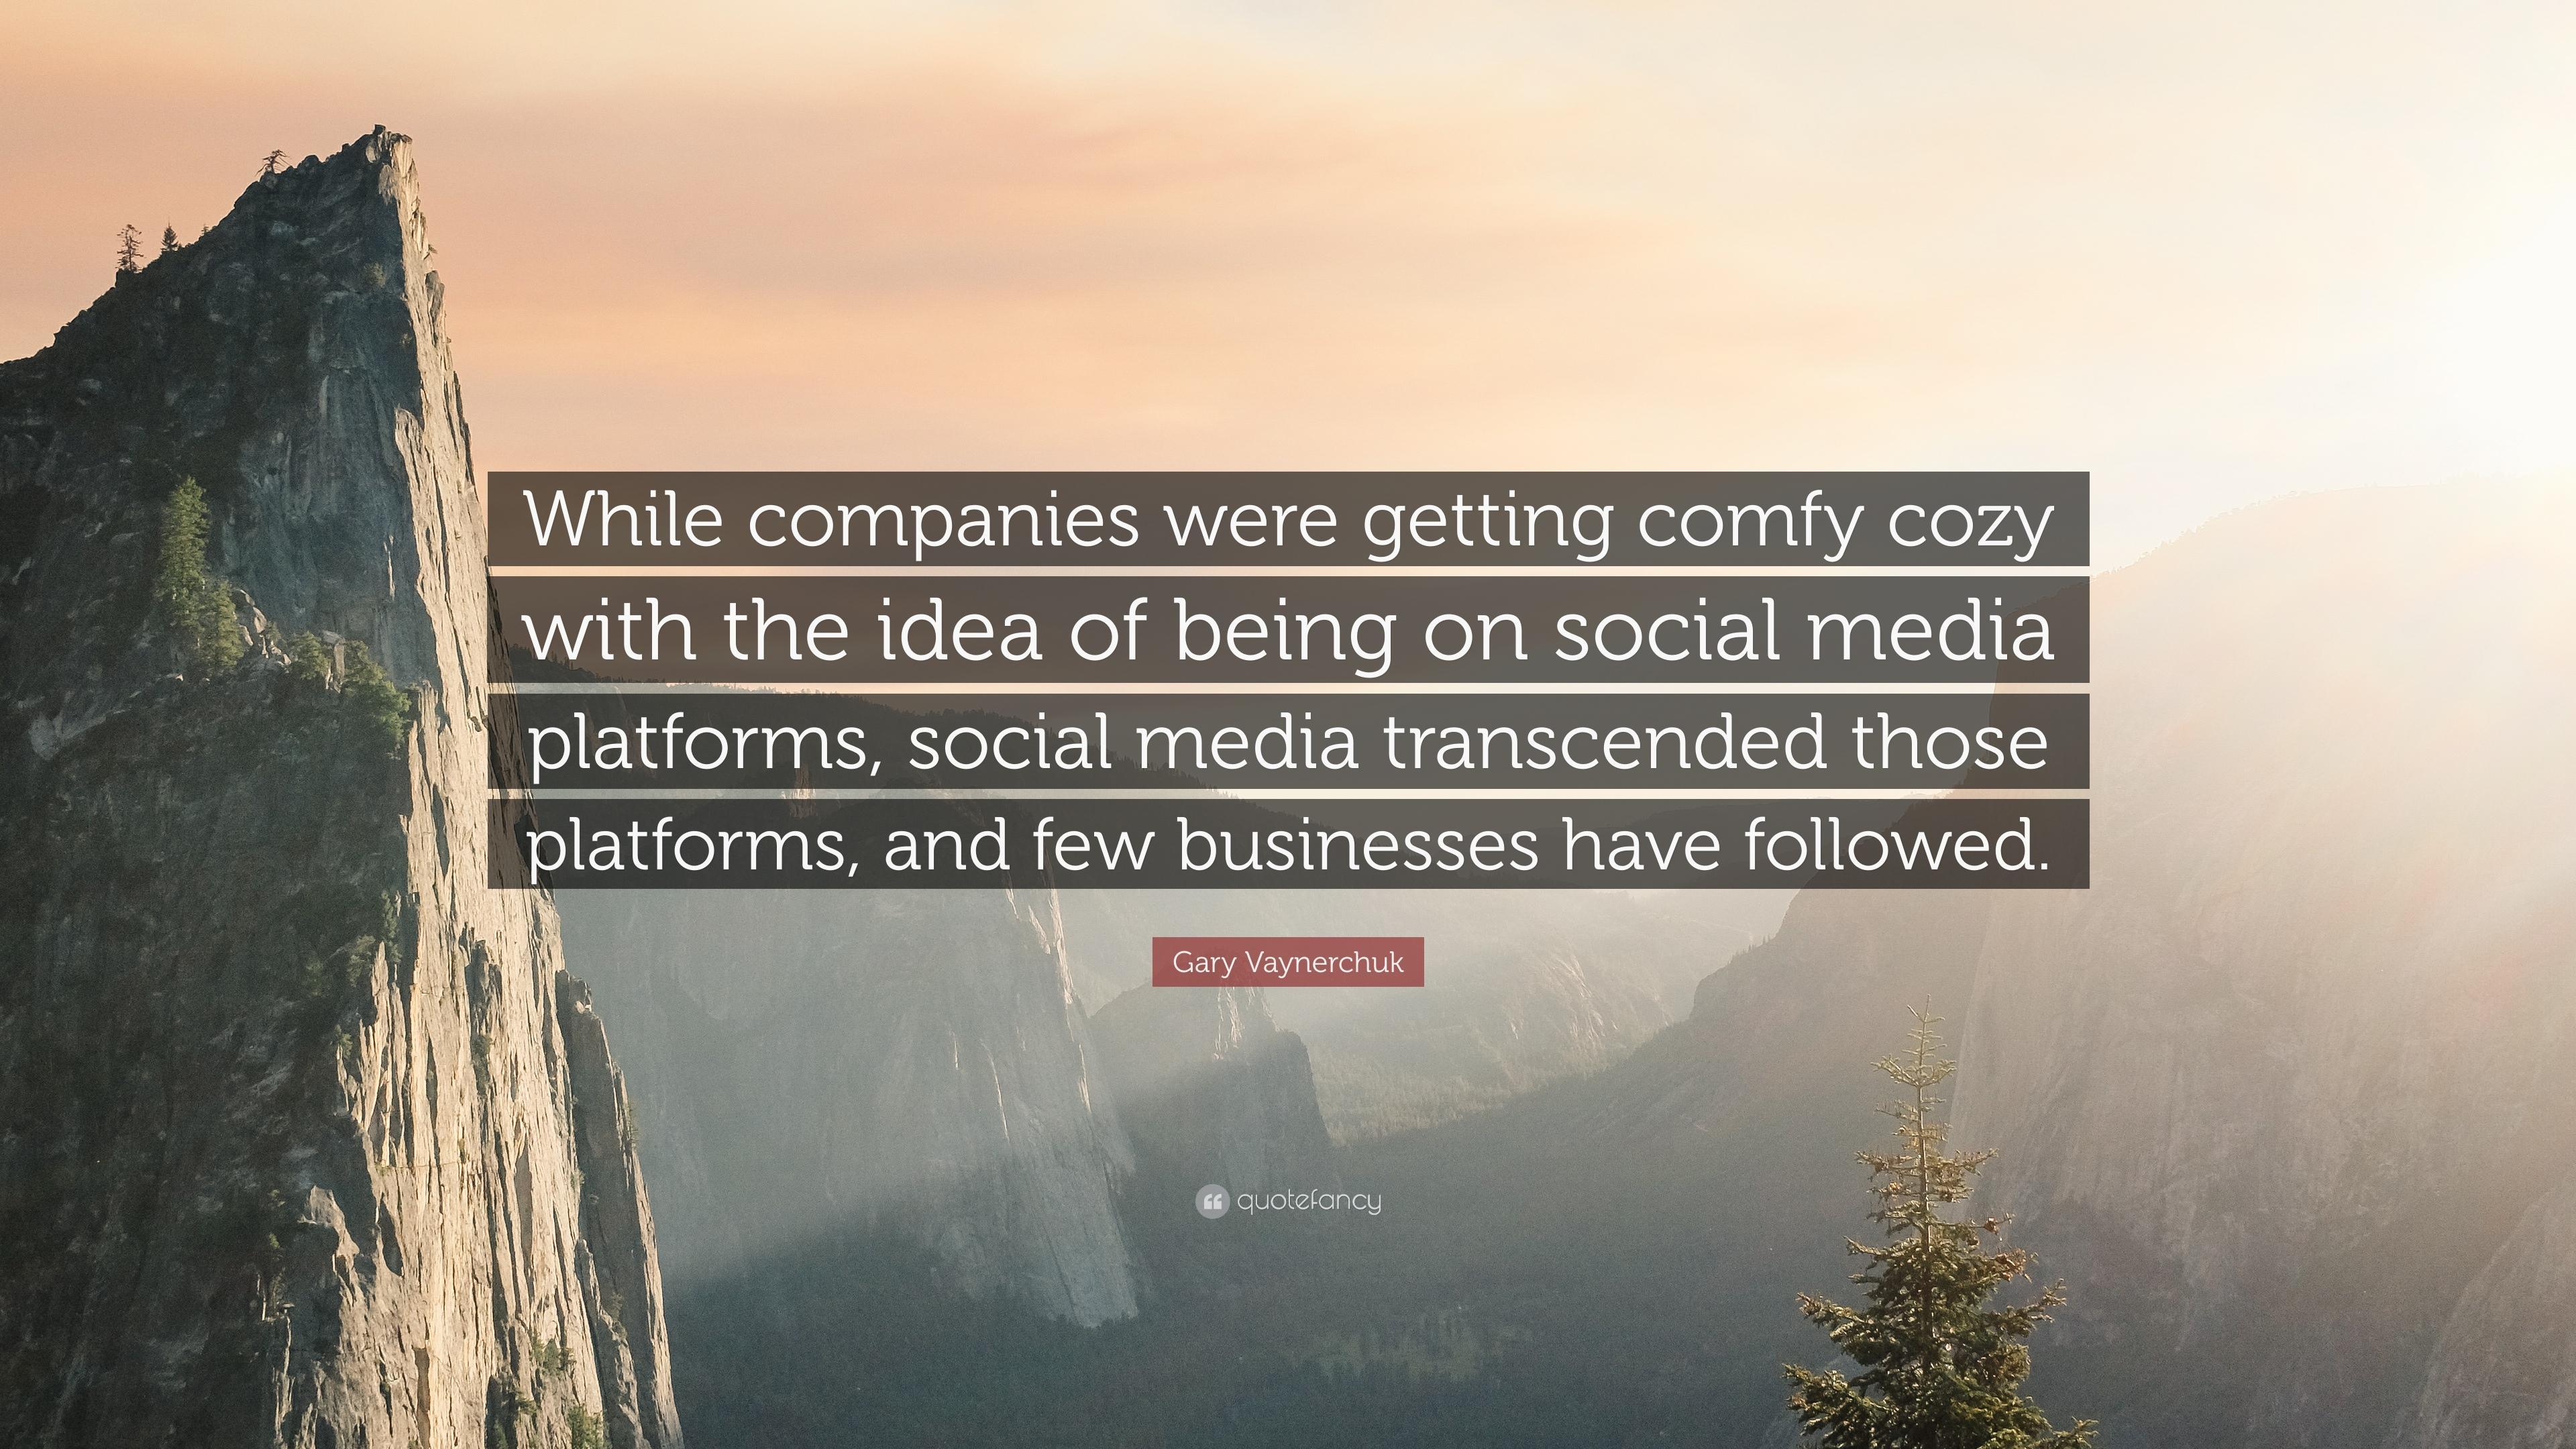 Gary Vaynerchuk Quote: “While companies were getting comfy cozy